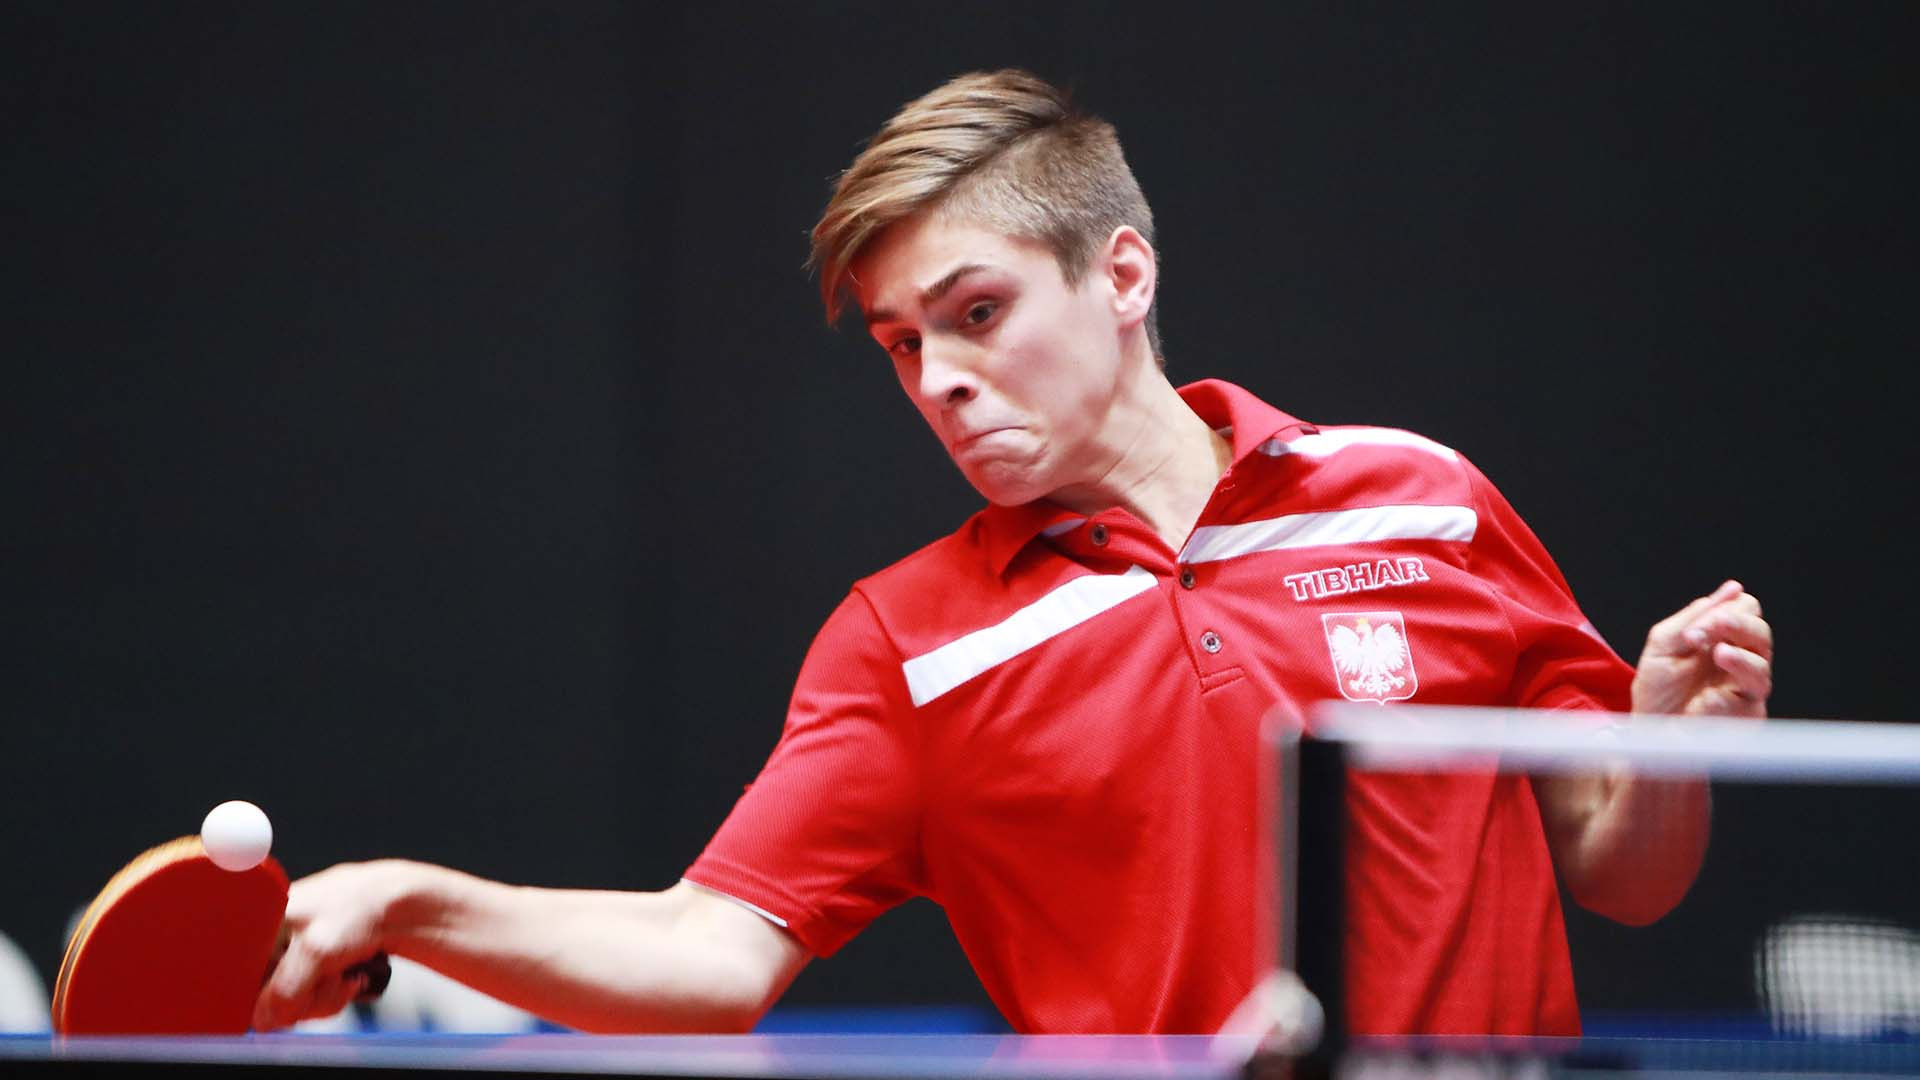 Poland beat Brazil in the first round of the boys' team event at the ITTF World Junior Table Tennis Championships to improve their chances of reaching the quarter-final ©Rémy Gros/ITTF